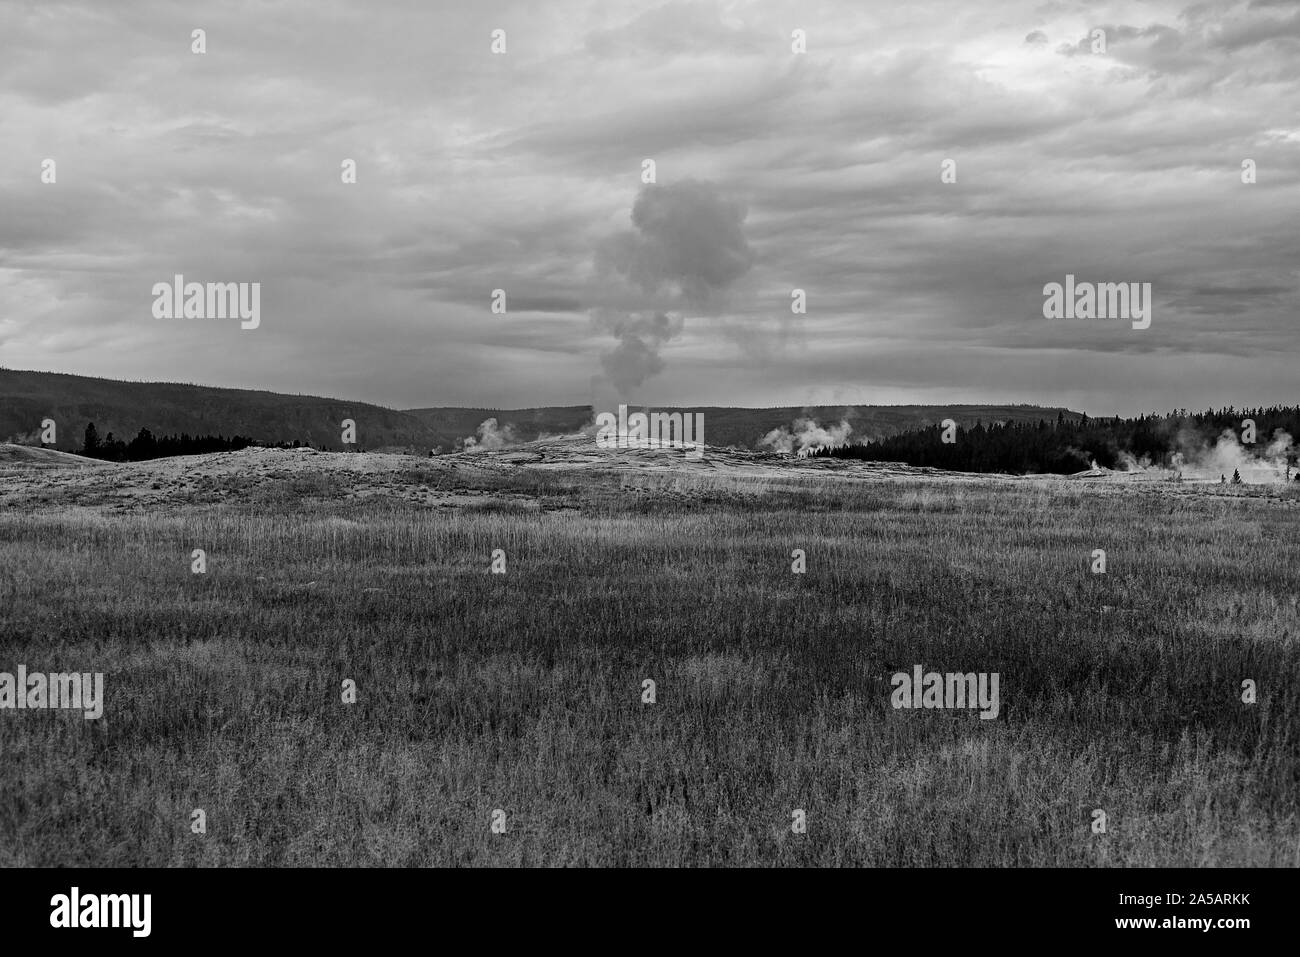 Cold day, grassy fields with erupting geyser and mountains beyond under cloudy skies. Stock Photo